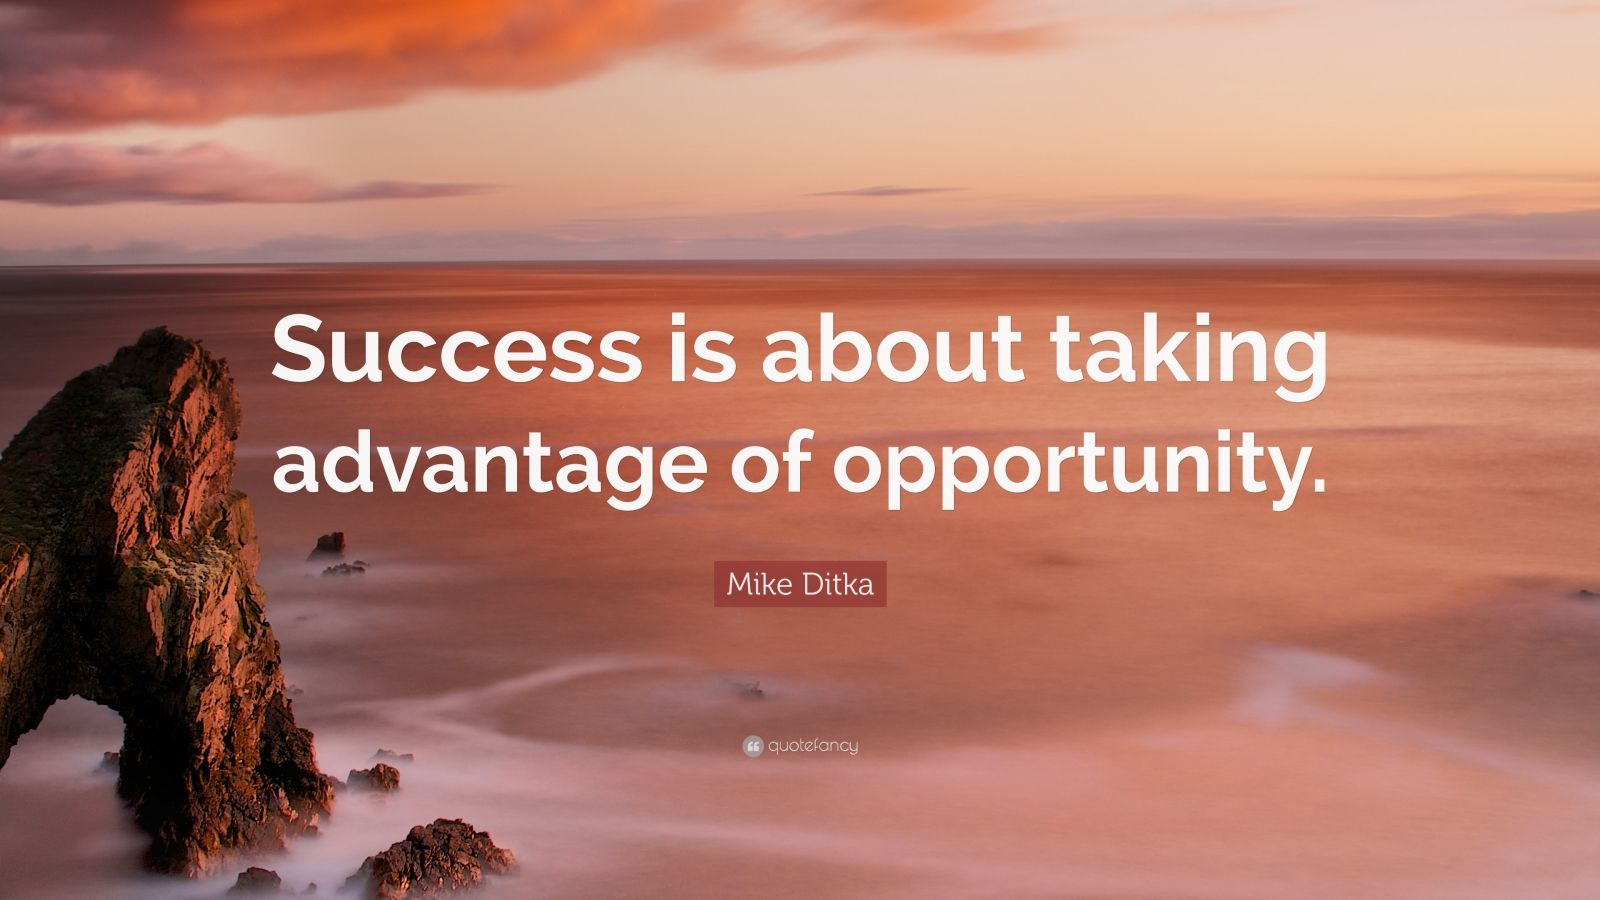 Mike Ditka Quote: “Success is about taking advantage of opportunity